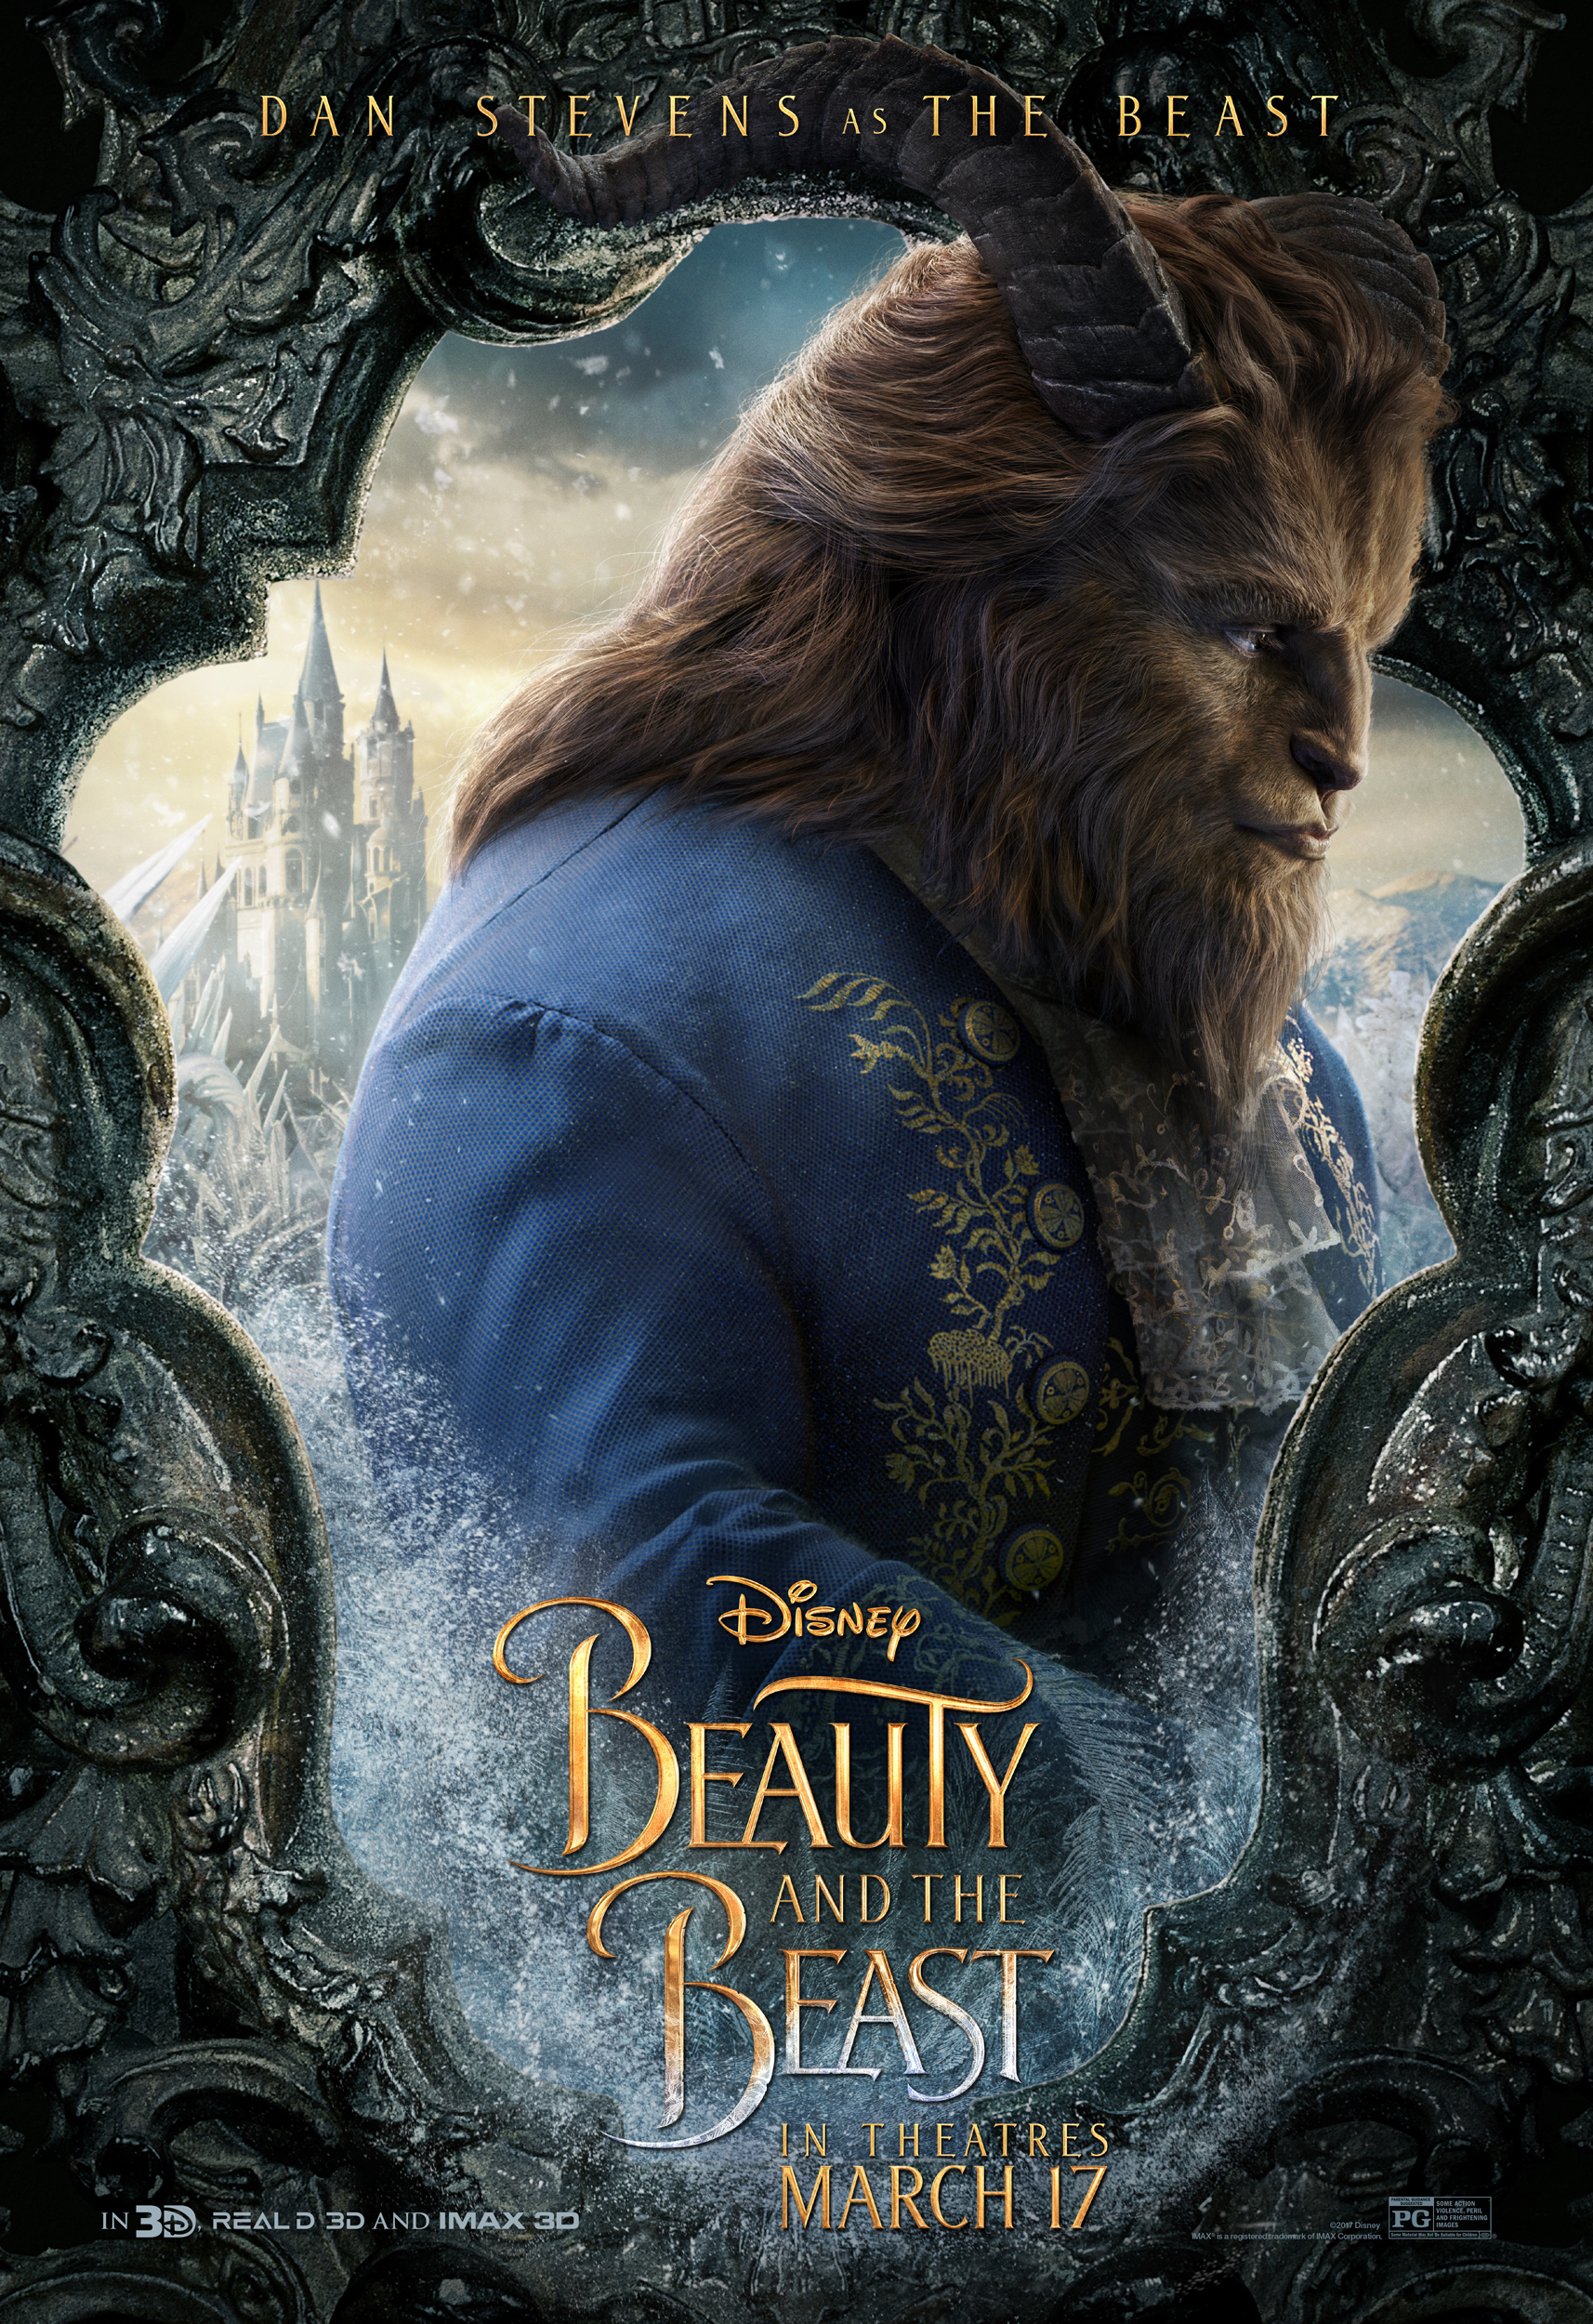 NEW Beauty and the Beast Character Posters #BeOurGuest